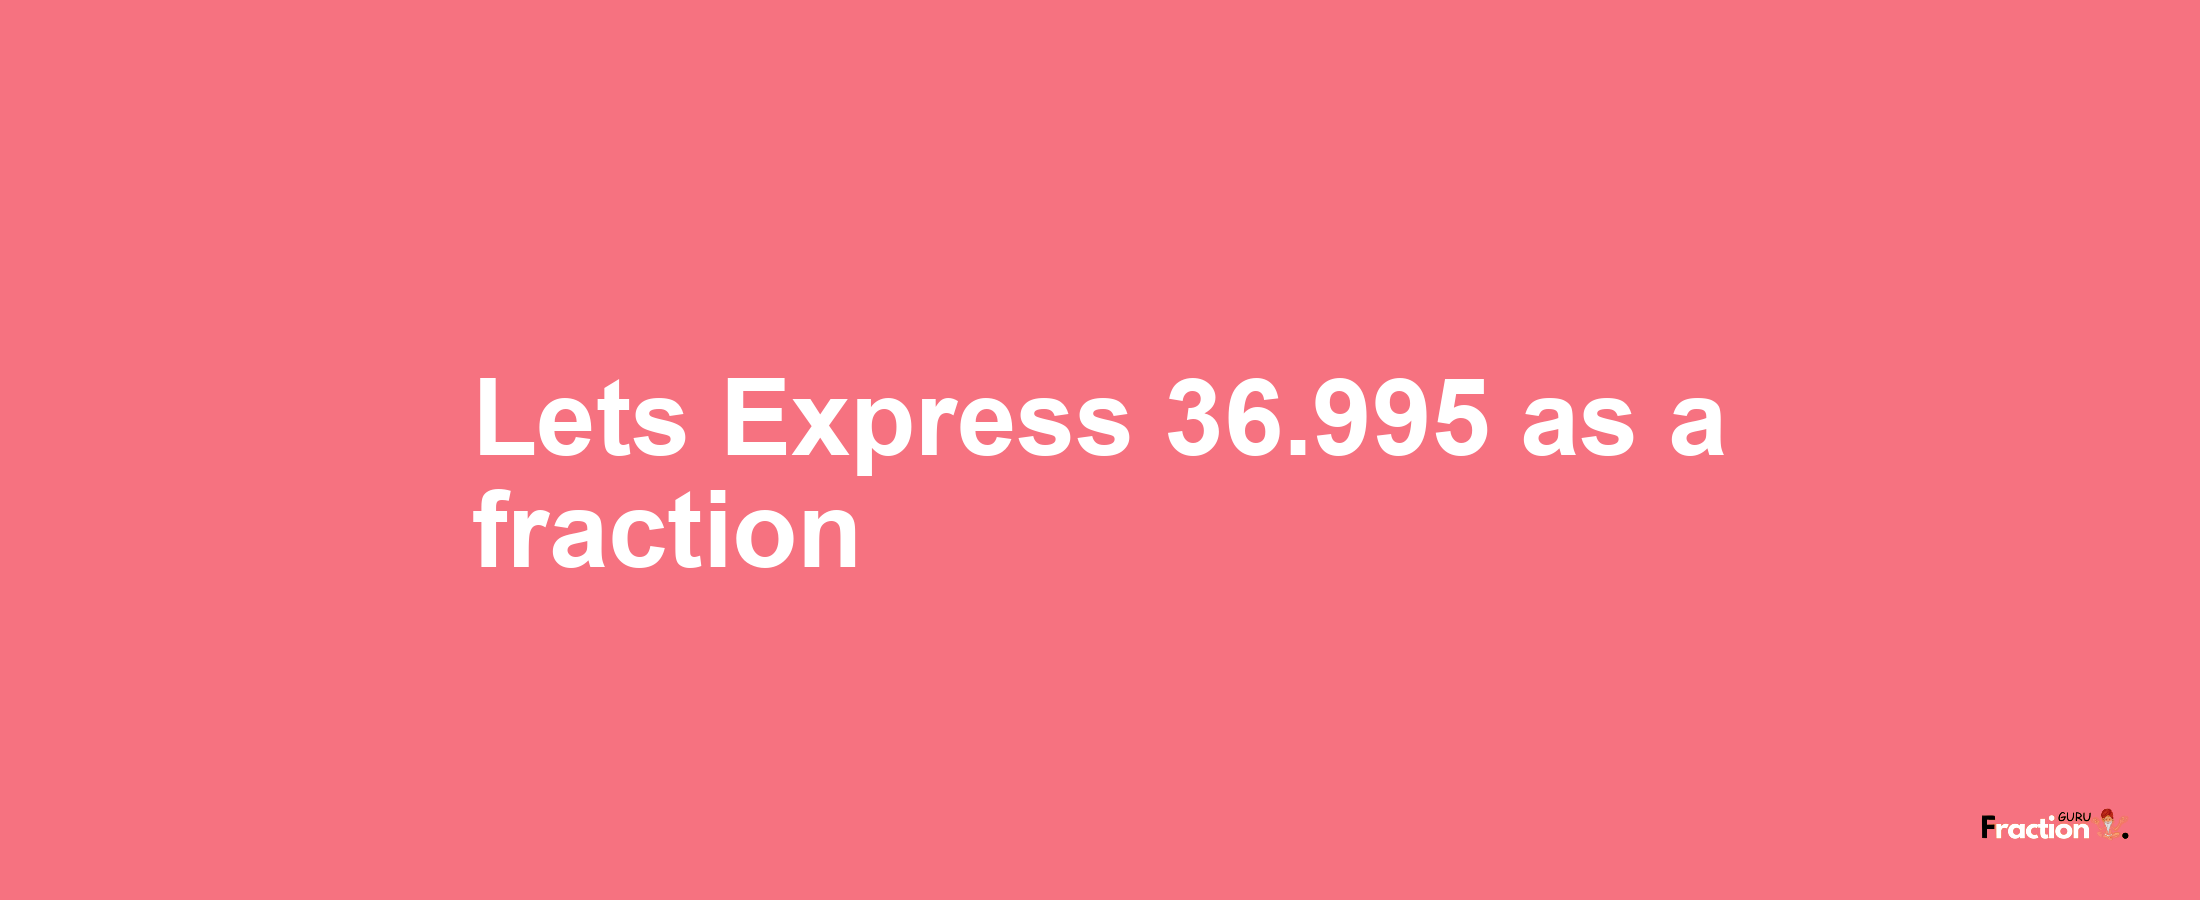 Lets Express 36.995 as afraction